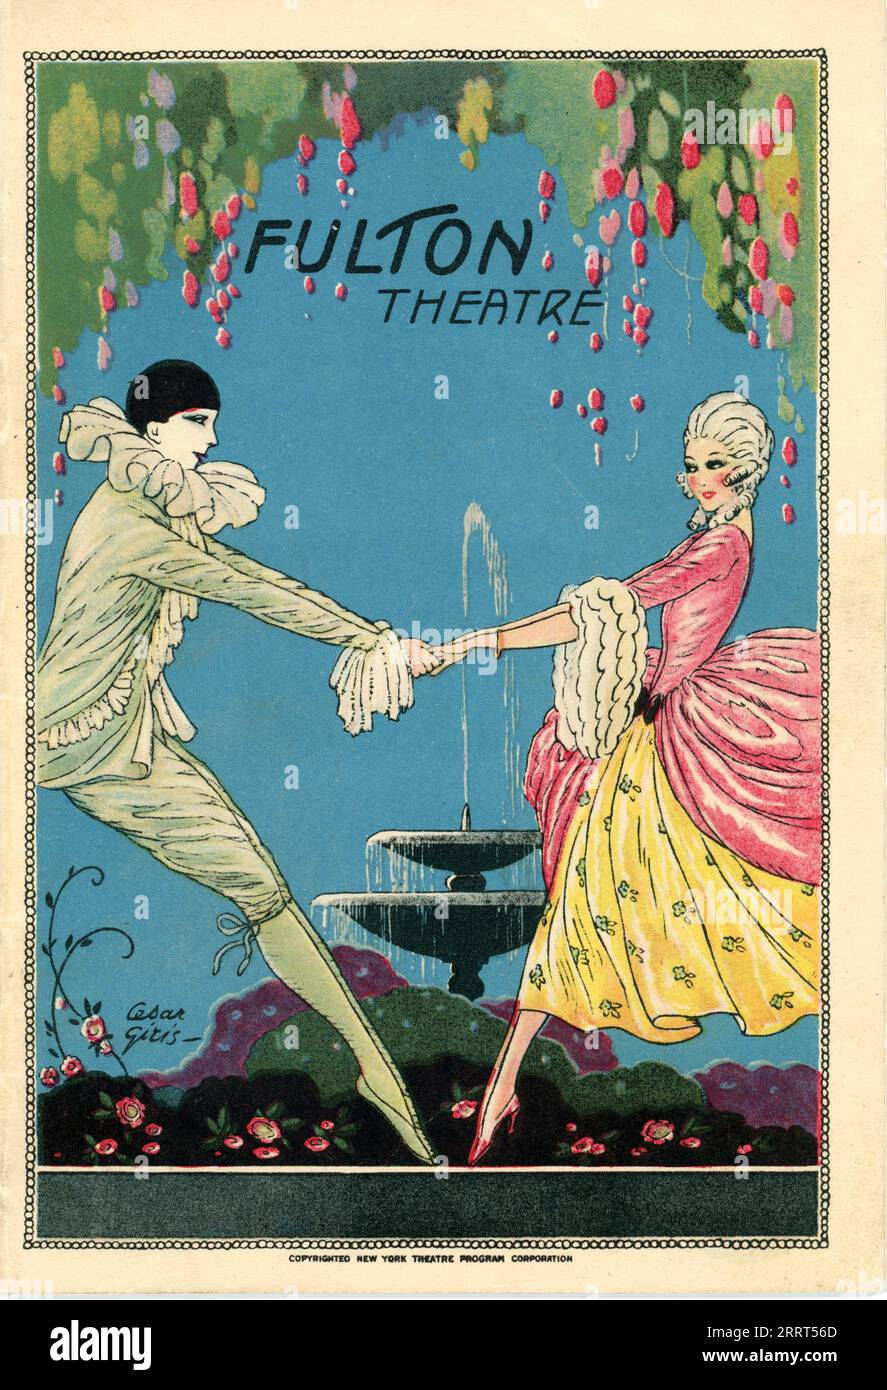 Front Cover of Programme for week beginning Monday April 2nd 1928 for BELA LUGOSI EDWARD VAN SLOAN BERNARD JUKES DOROTHY PETERSON NEDDA HARRIGAN and HELEN MACK in the original US stage production of DRACULA The Vampire Play dramatized by Hamilton Deane and John Balderston from the novel by Bram Stoker produced by Horace Liveright at the Fulton Theatre , 46th Street just West of Broadway where it opened on October 5th 1927 and closed in May 1928 after 261 performances Stock Photo